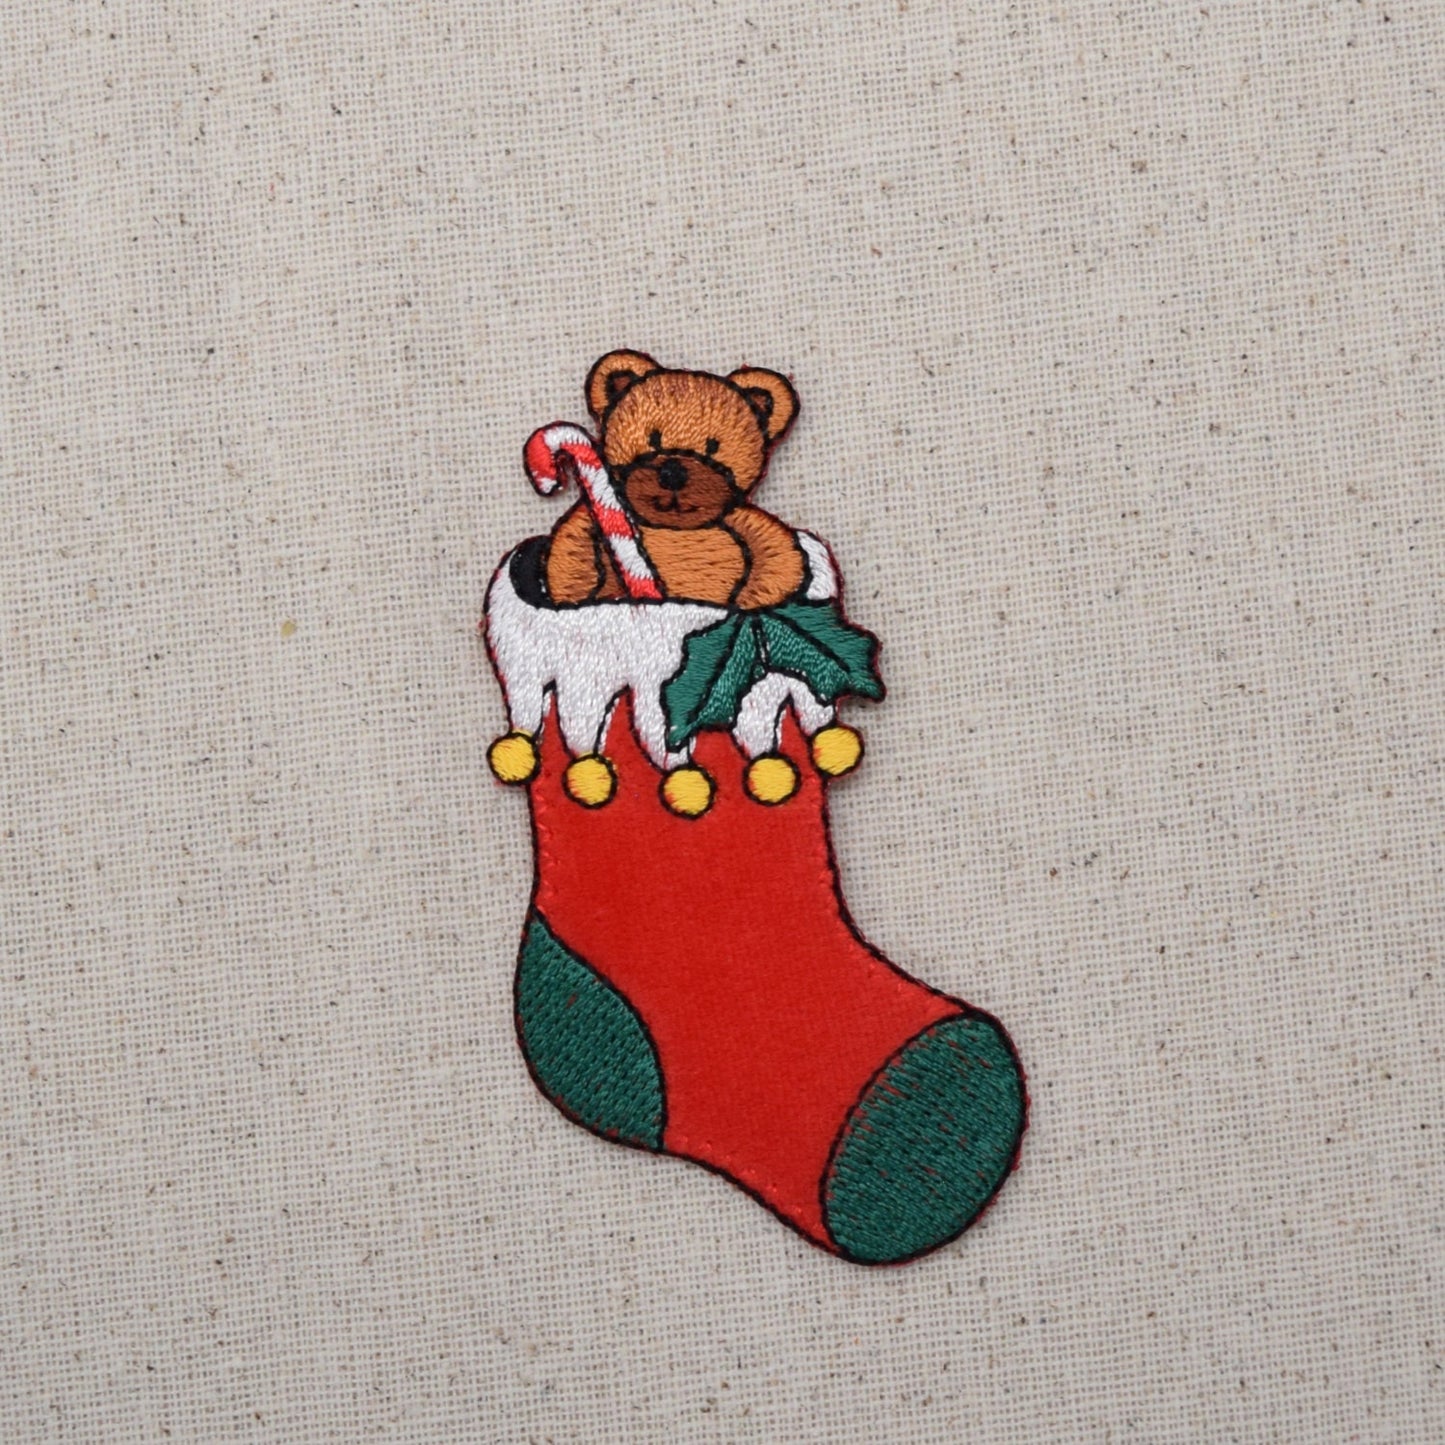 Christmas Teddy Bear in Red Stocking - Candy Cane - Iron on Applique - Embroidered Patch